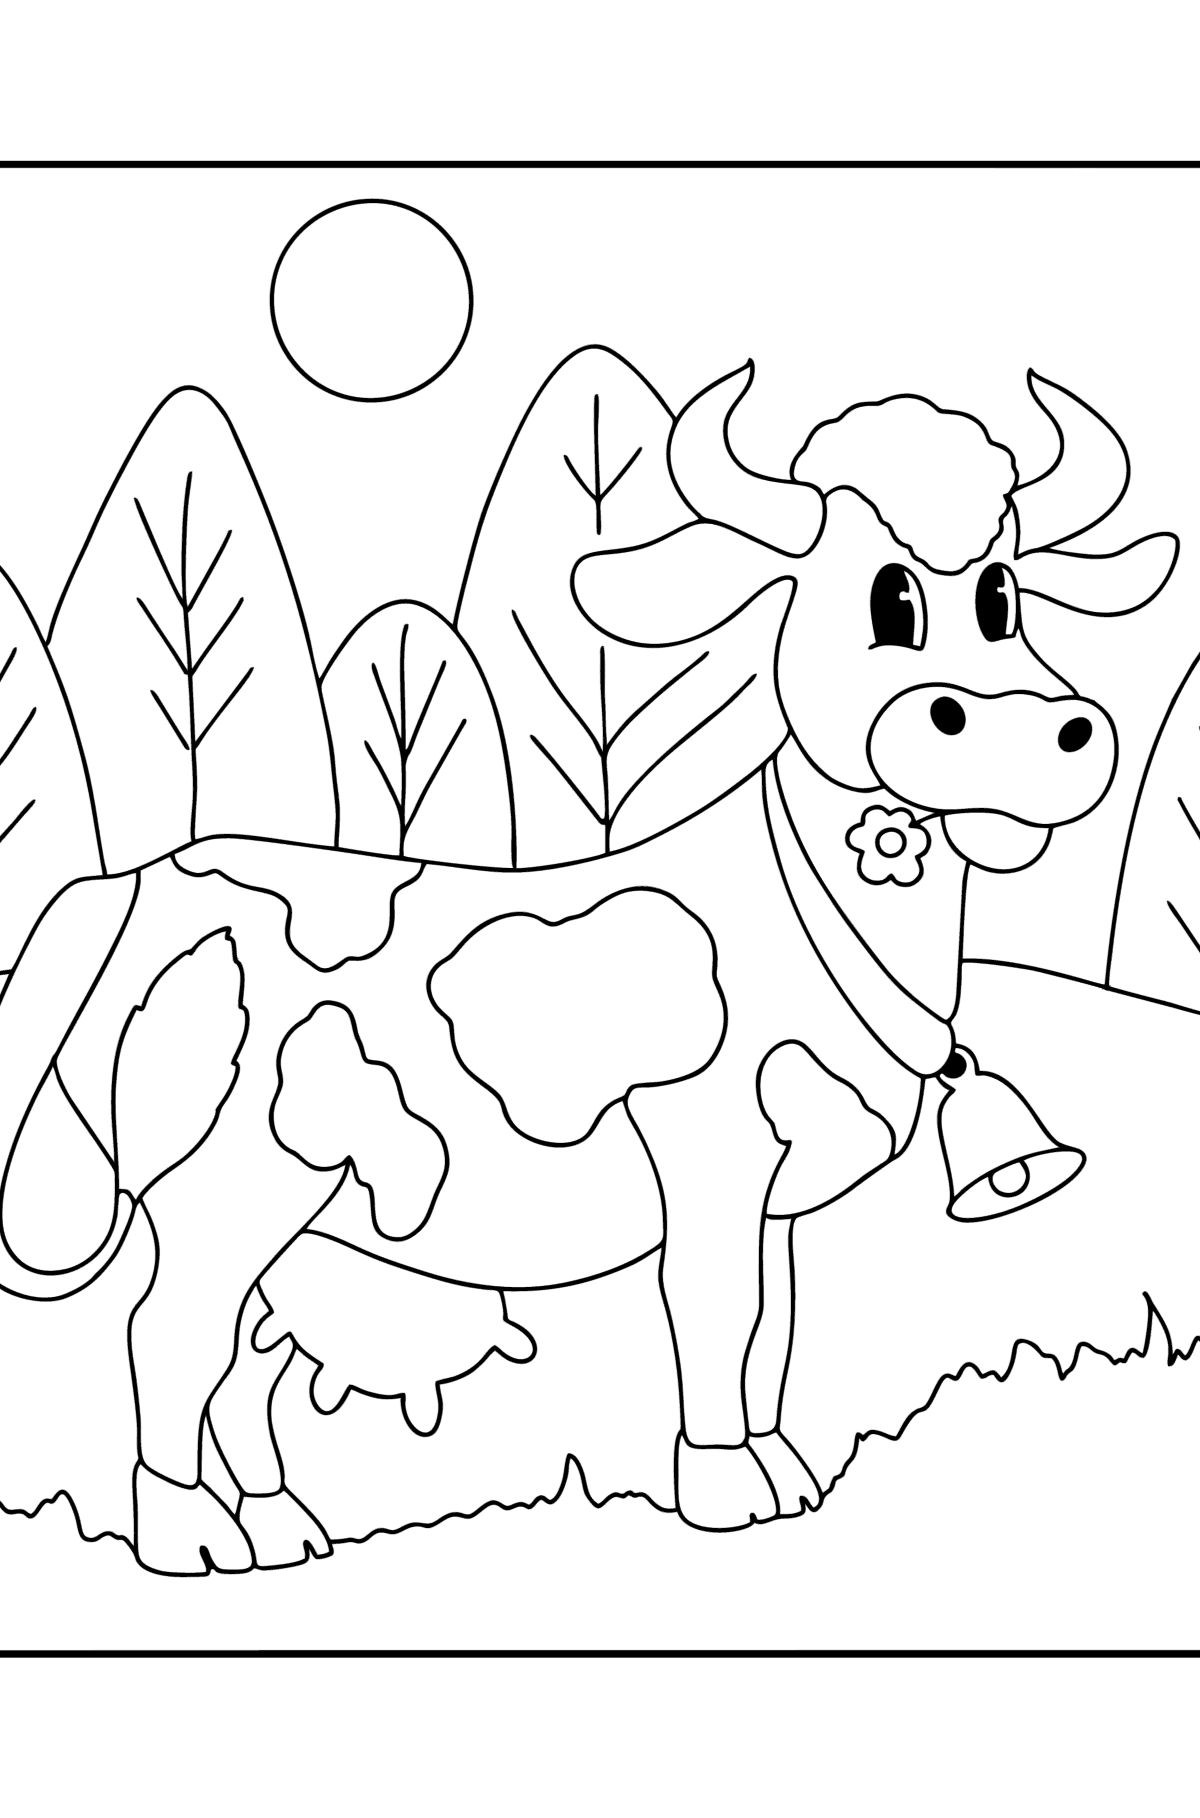 Realistic cow coloring page - Coloring Pages for Kids